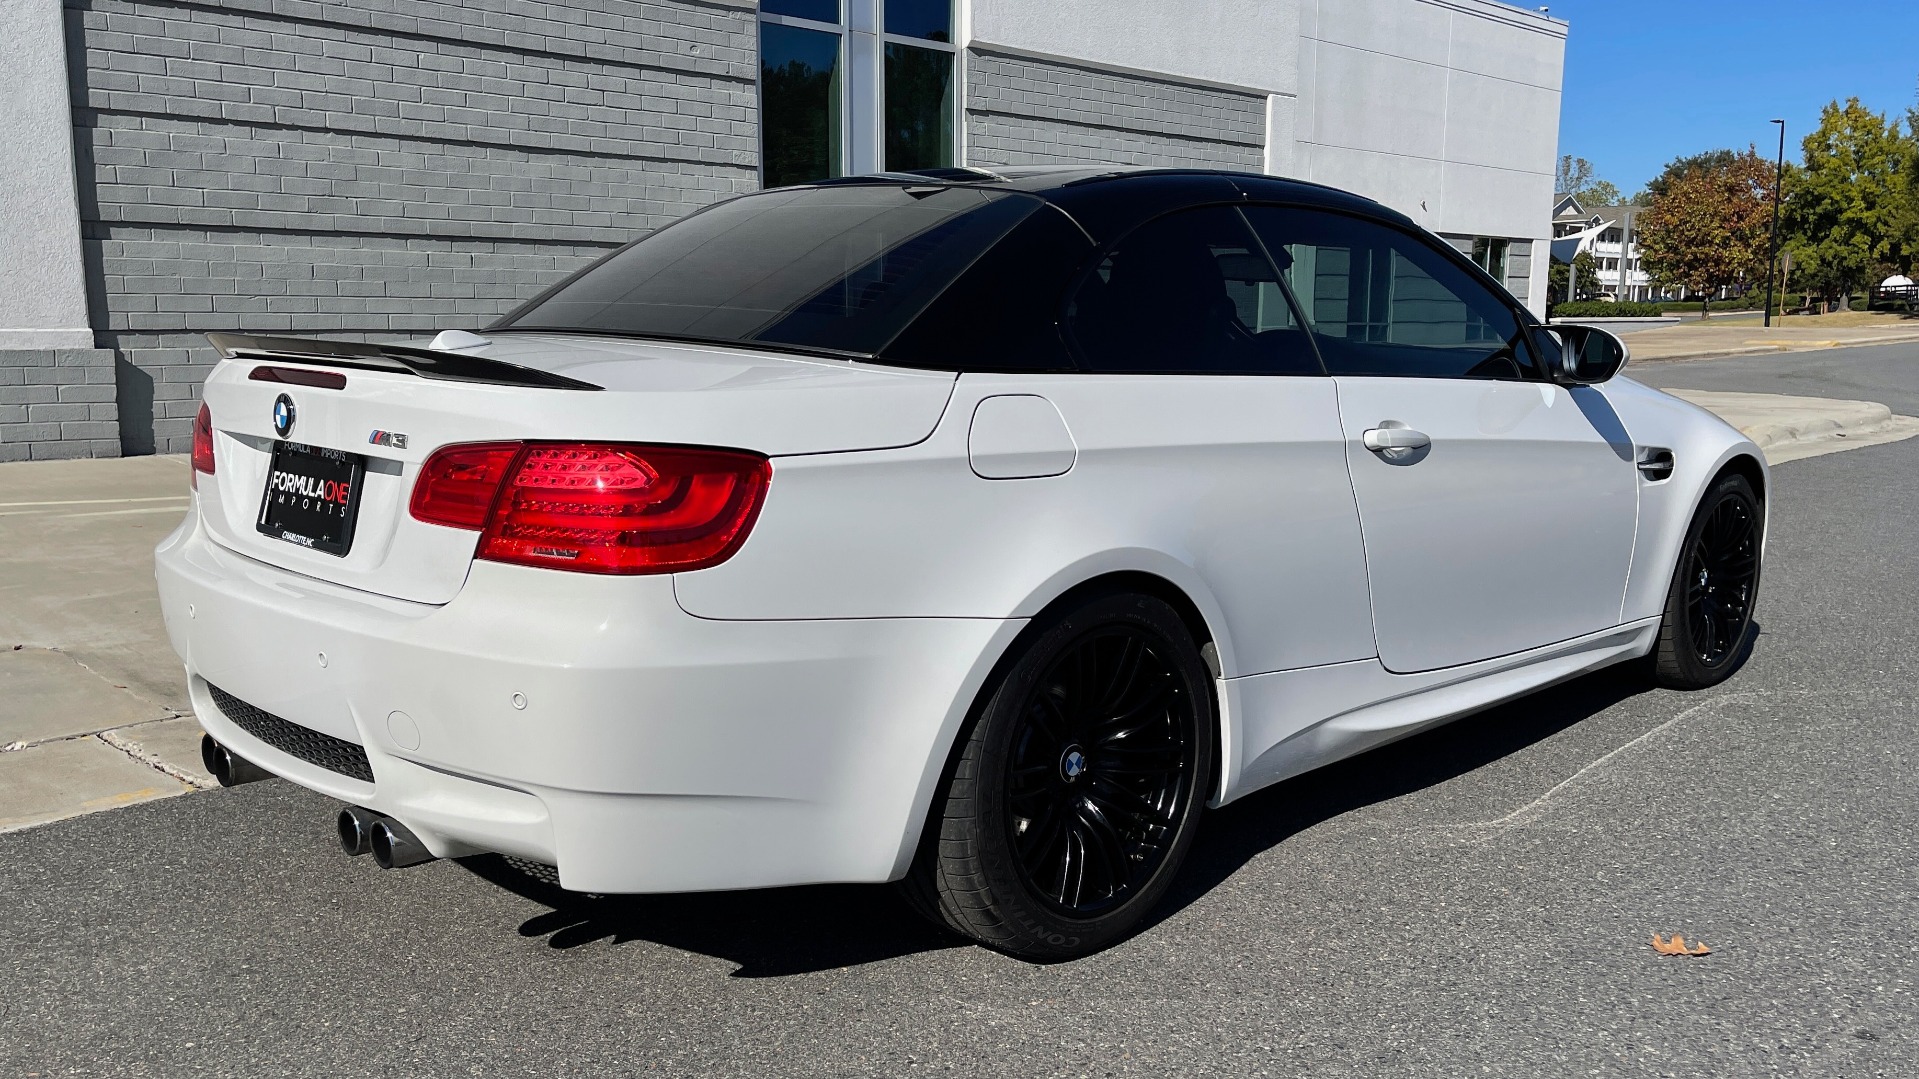 Used 2012 BMW M3 CONVERTIBLE / SC 4.0L V8 / 6-SPD MANUAL / NAV / HTD STS / SIRIUSXM for sale Sold at Formula Imports in Charlotte NC 28227 6